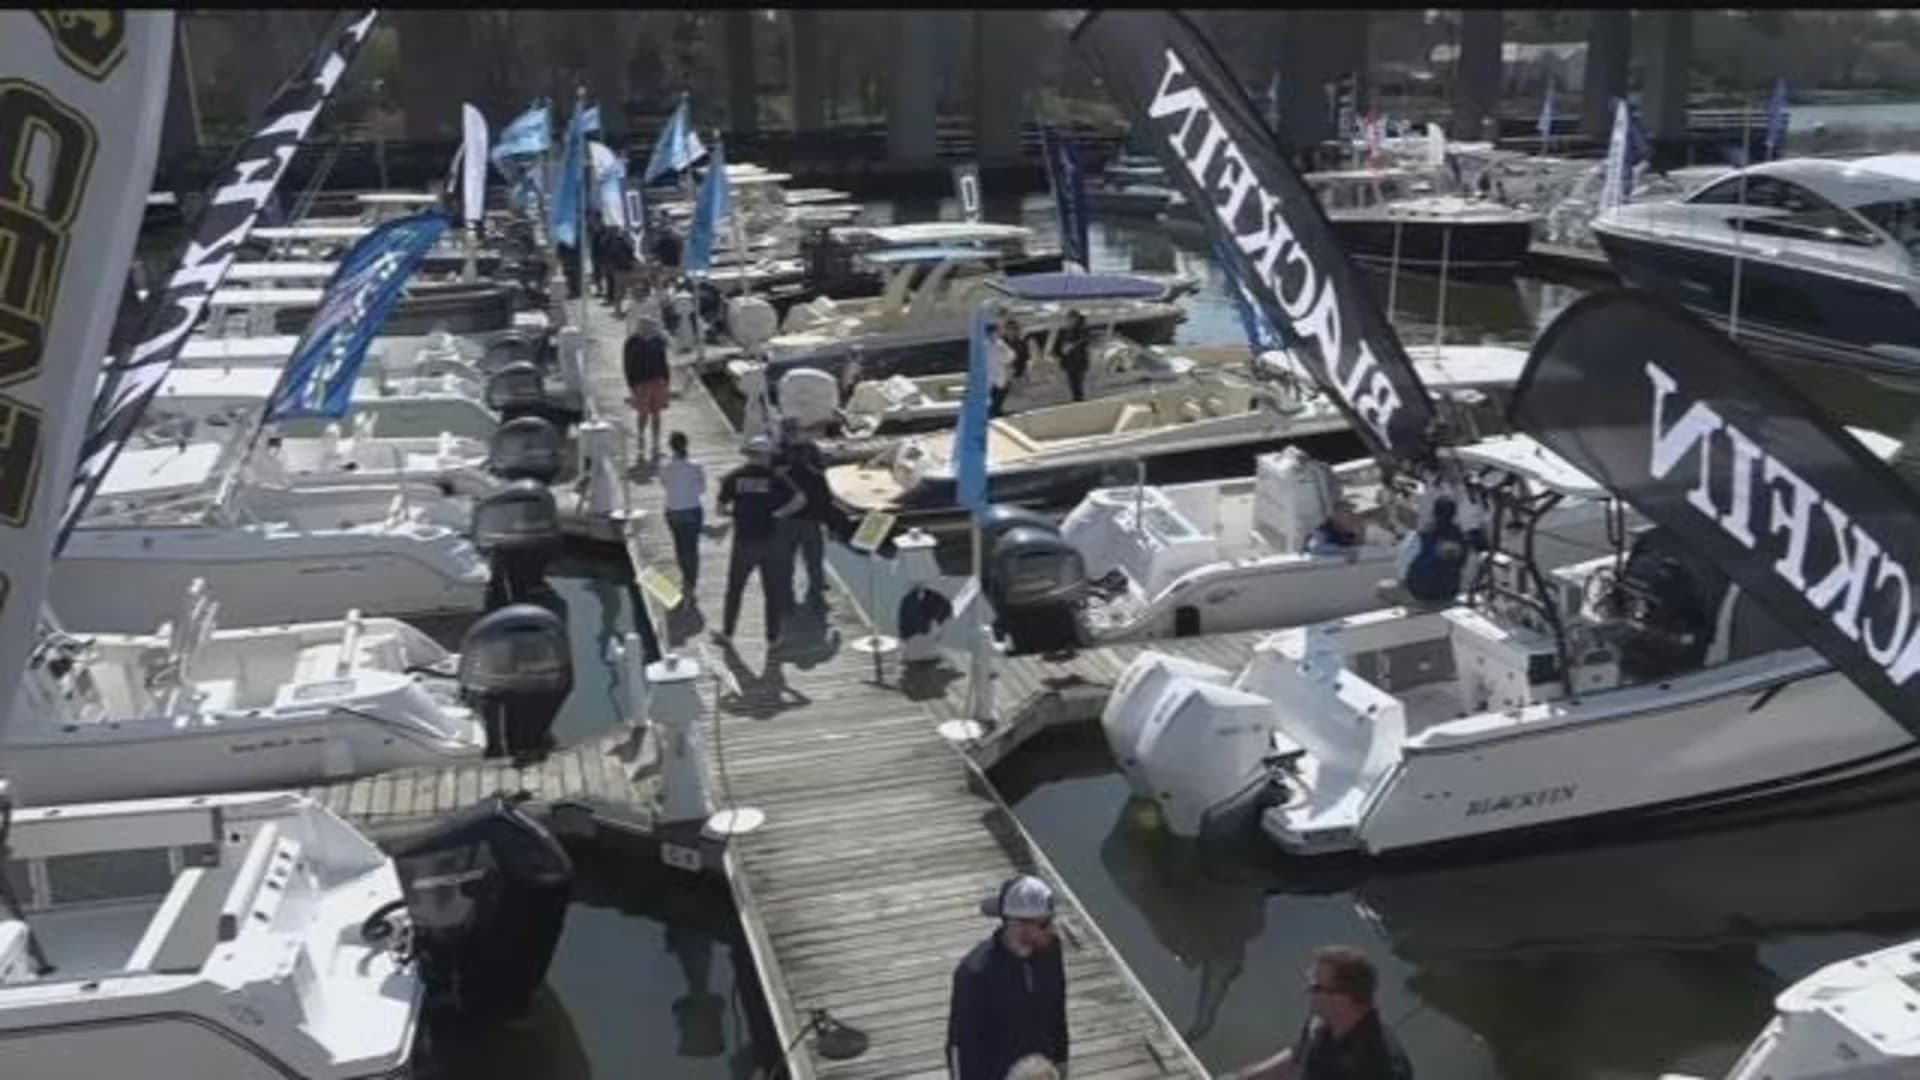 All aboard: The Greenwich Boat Show returns for its 11th year